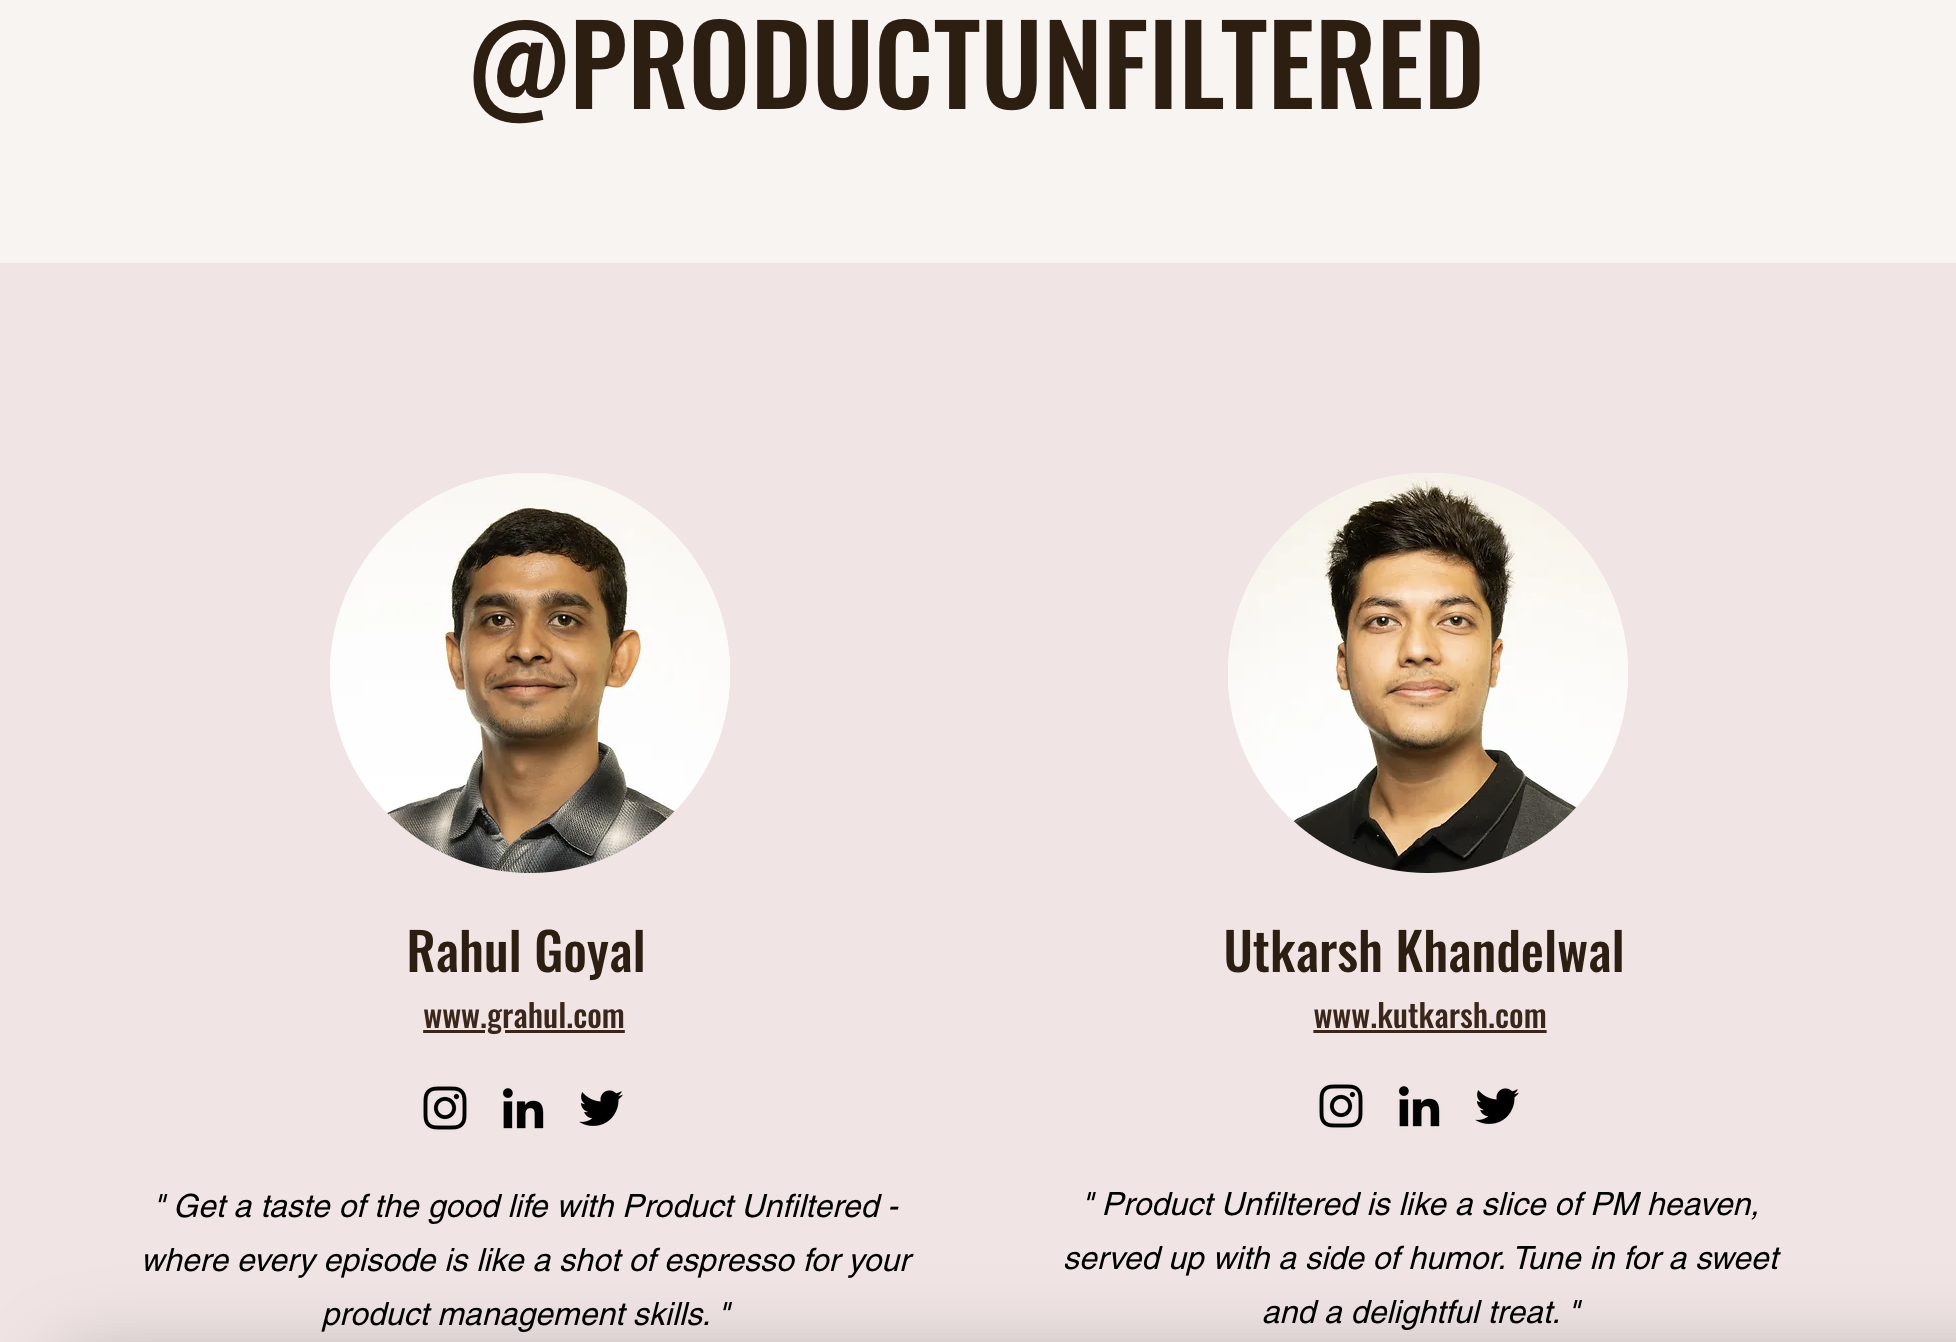 A screenshot from the product unfiltered website